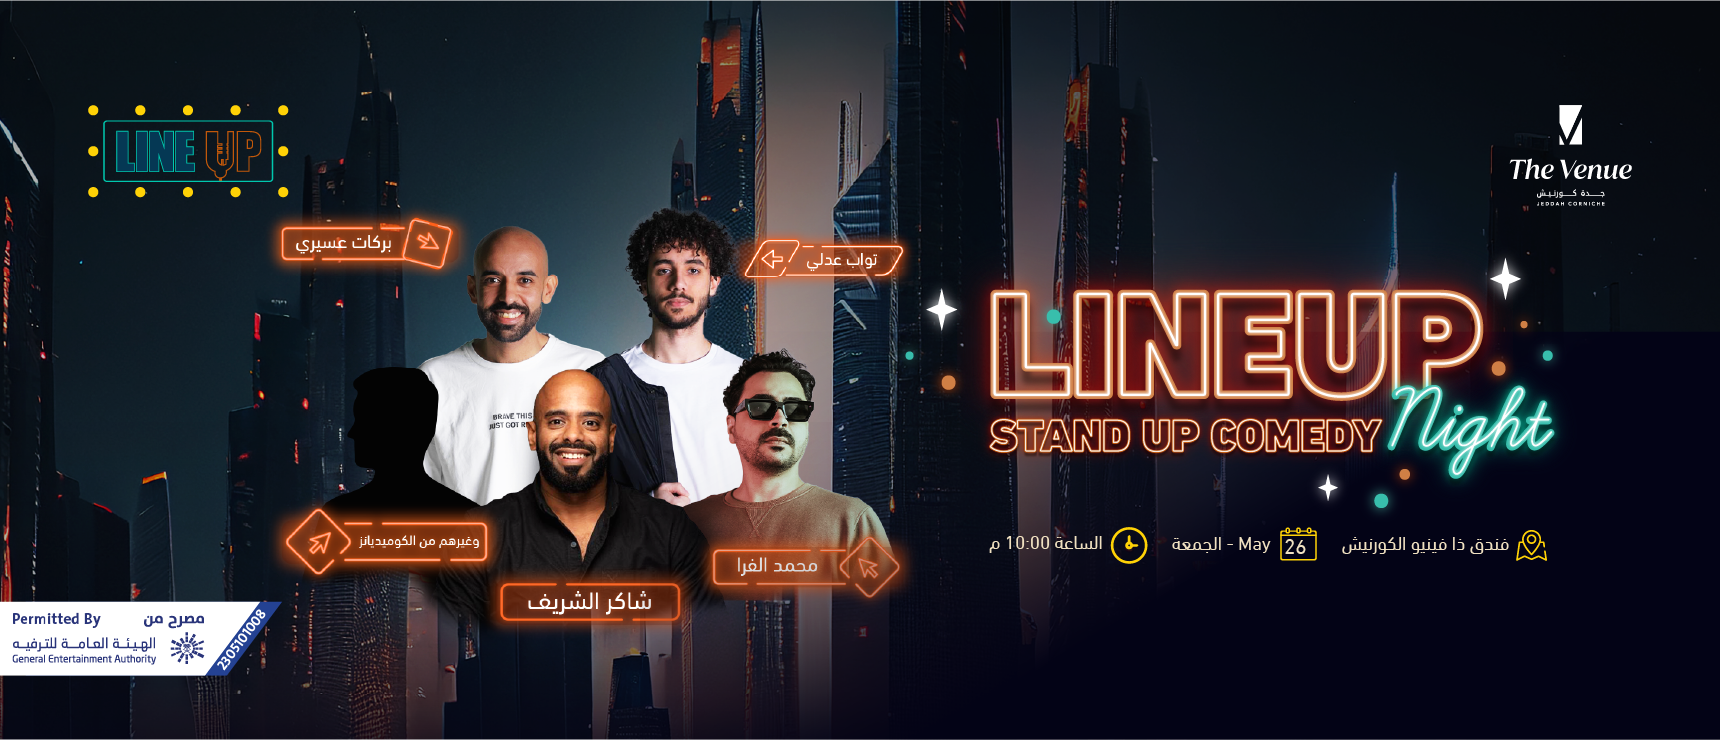 Stand up Comedy night – Lineup